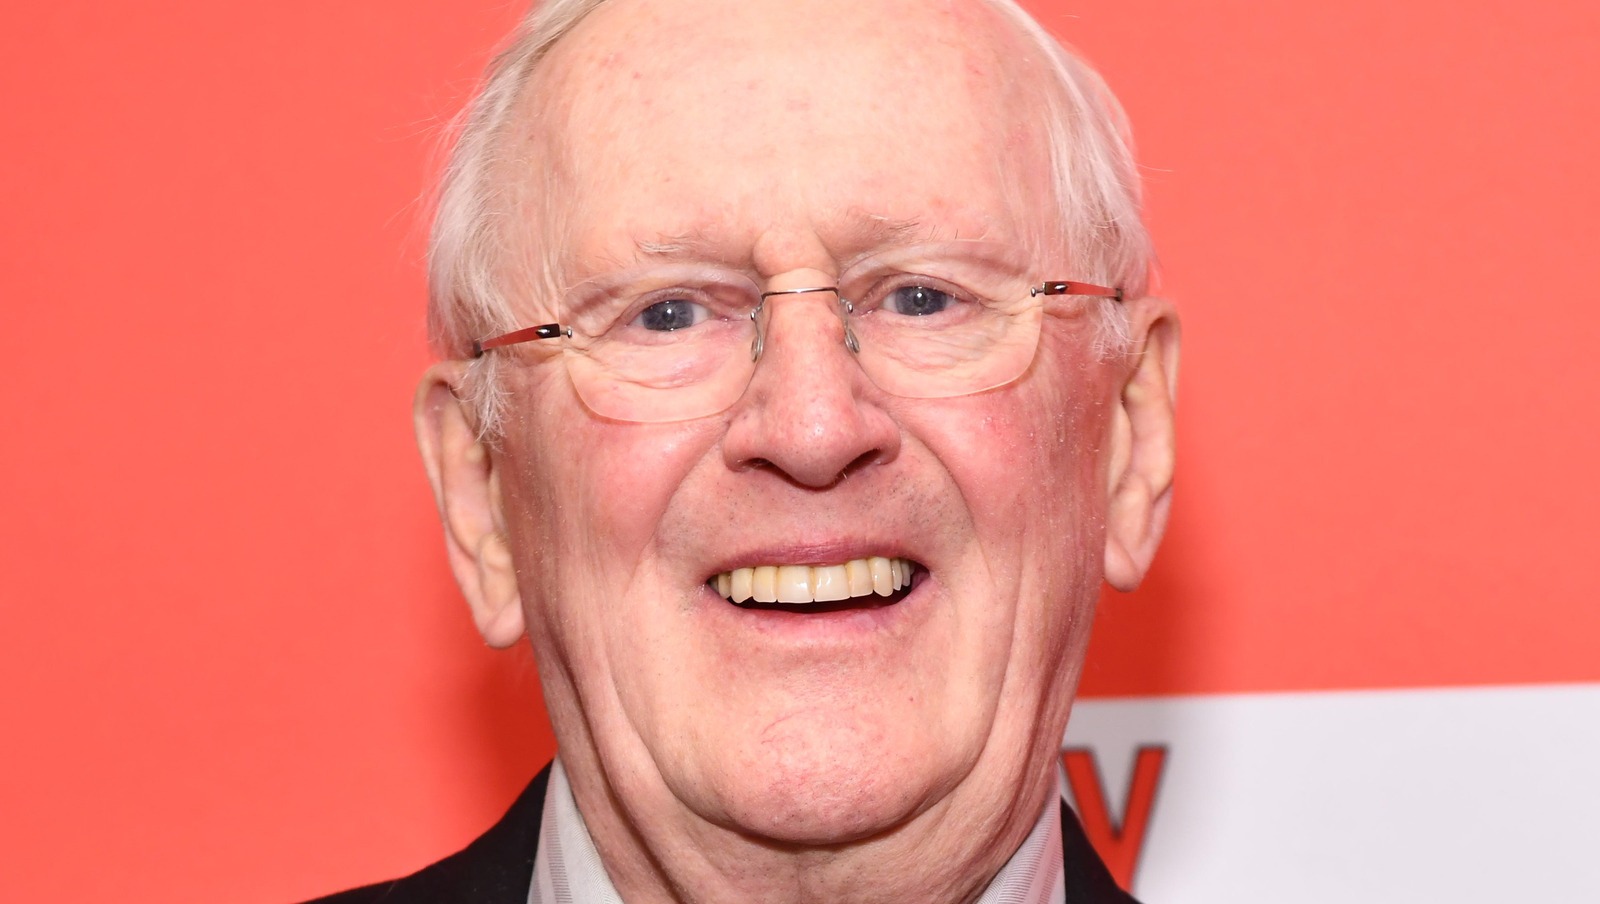 Blue Bloods' Len Cariou On Tom Selleck And Filming Reagan Family Dinners - Know Everything!